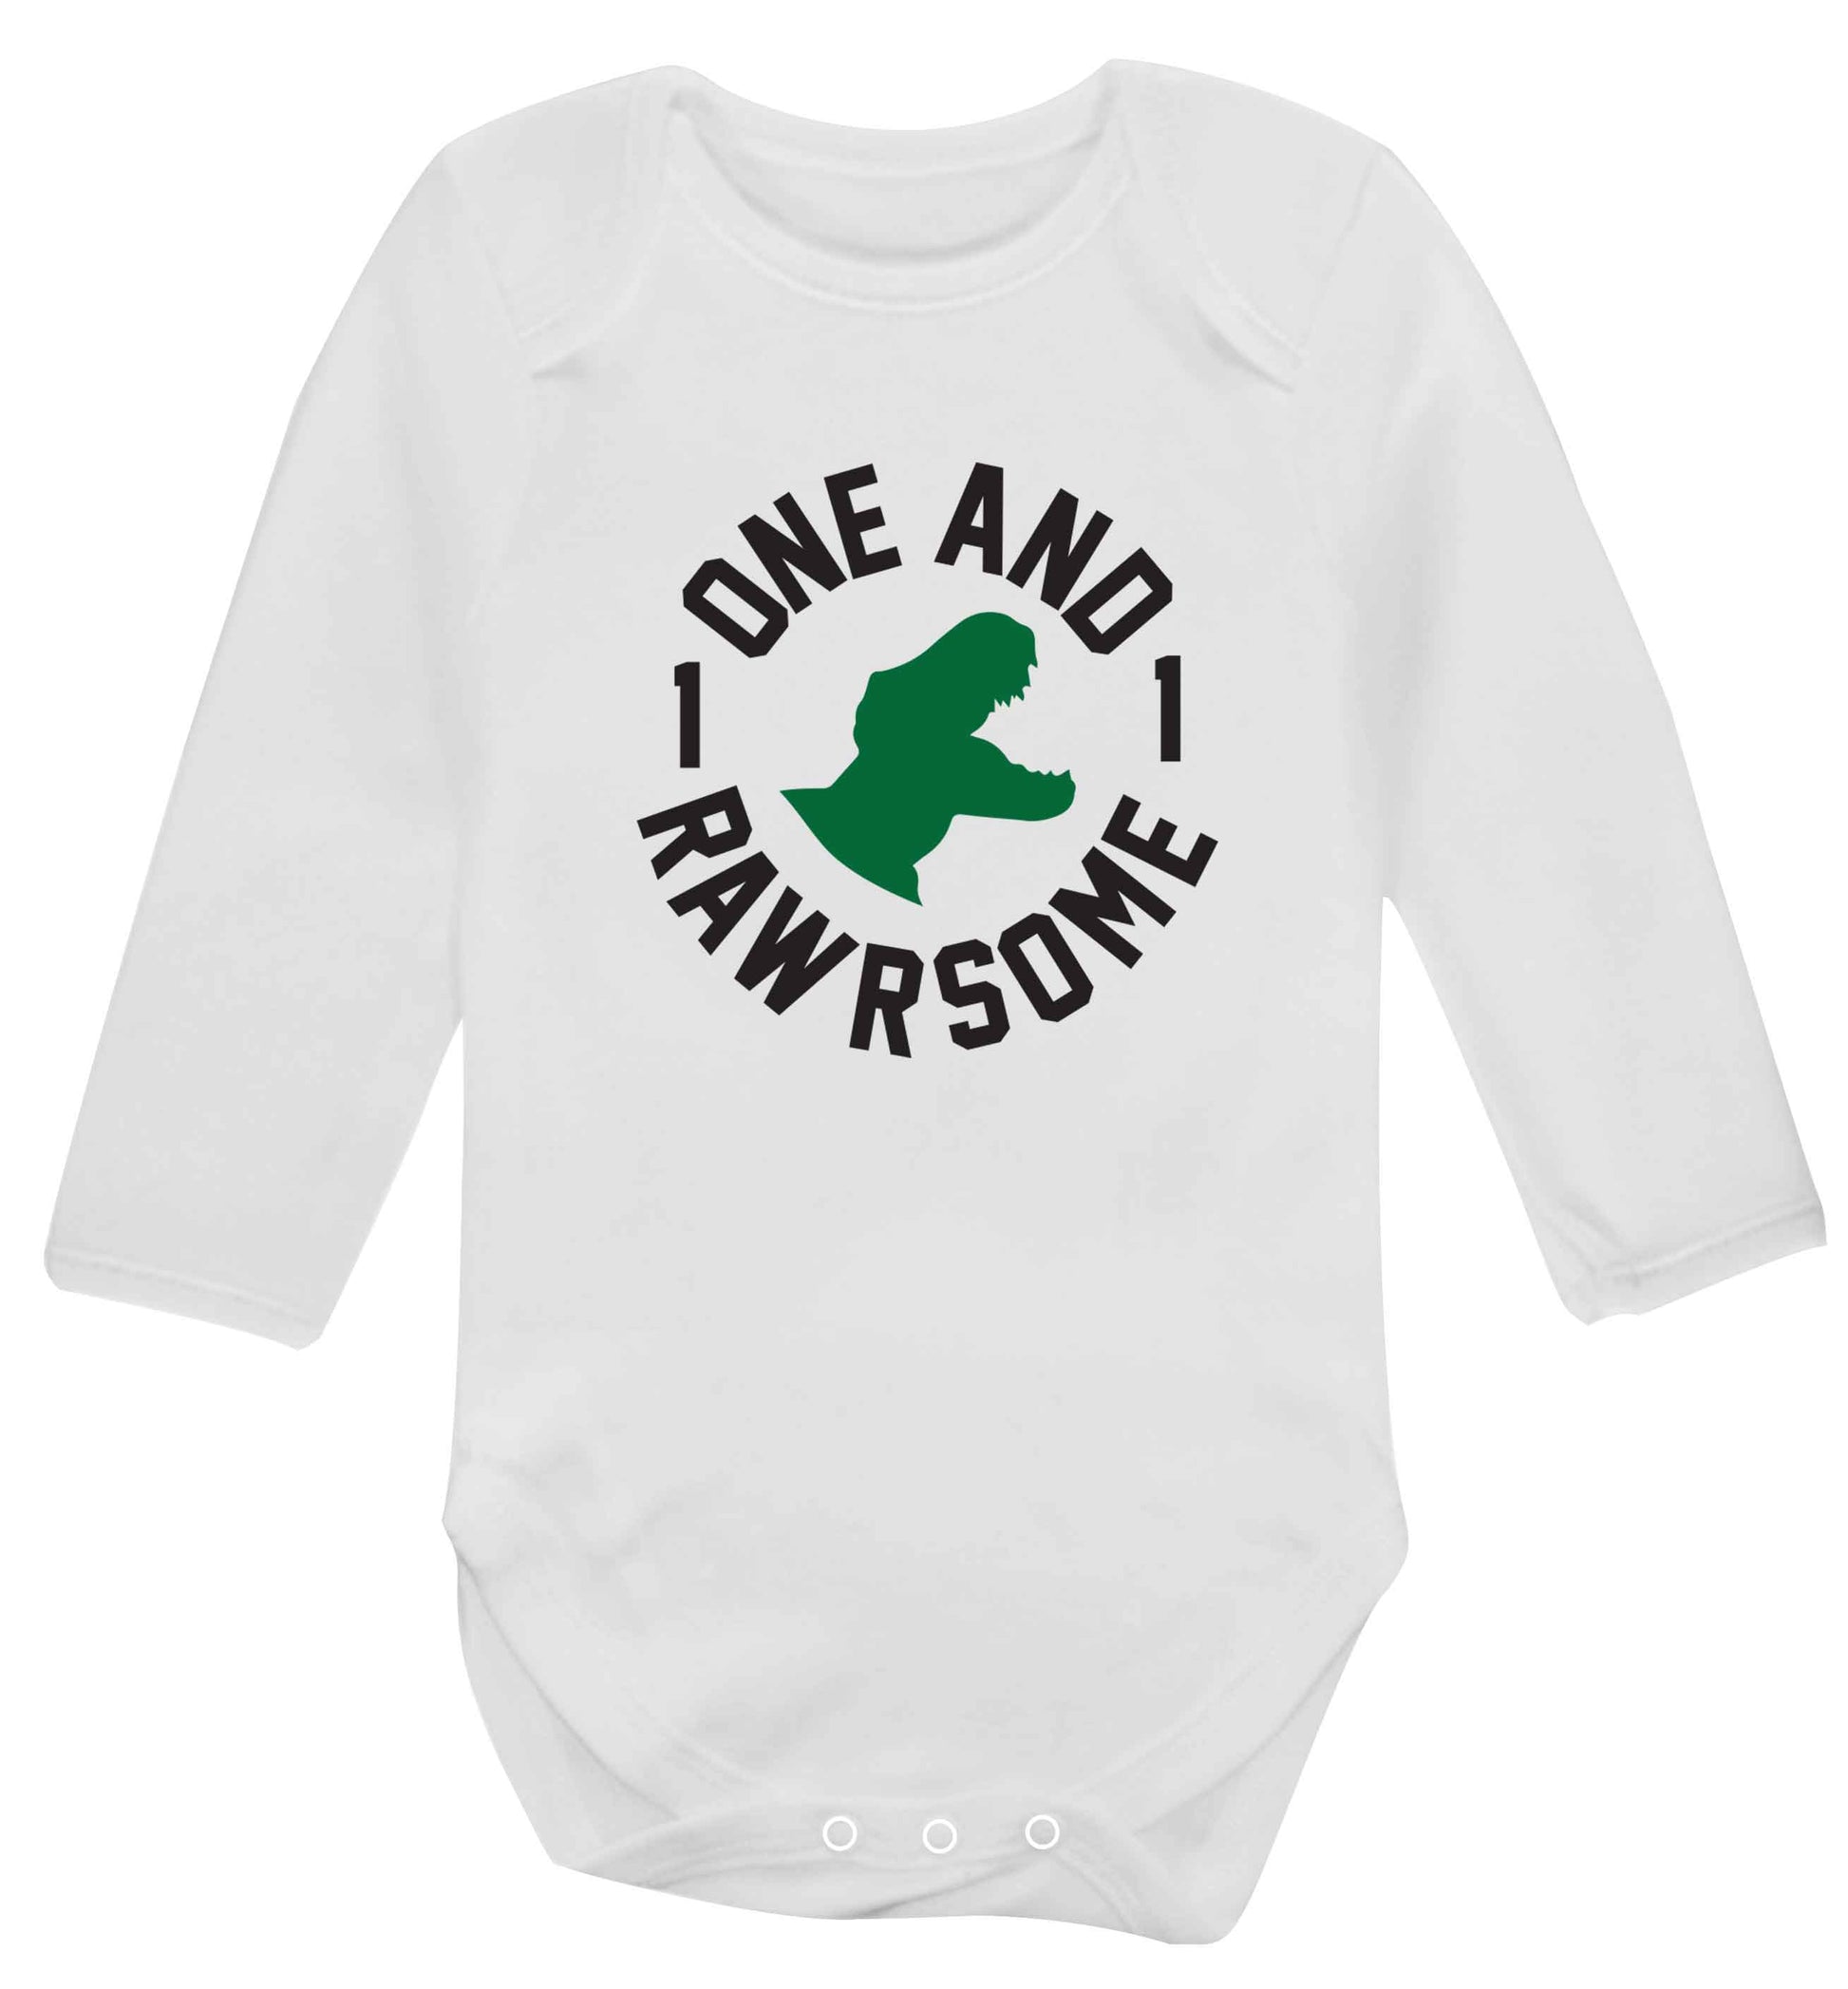 One and Rawrsome baby vest long sleeved white 6-12 months